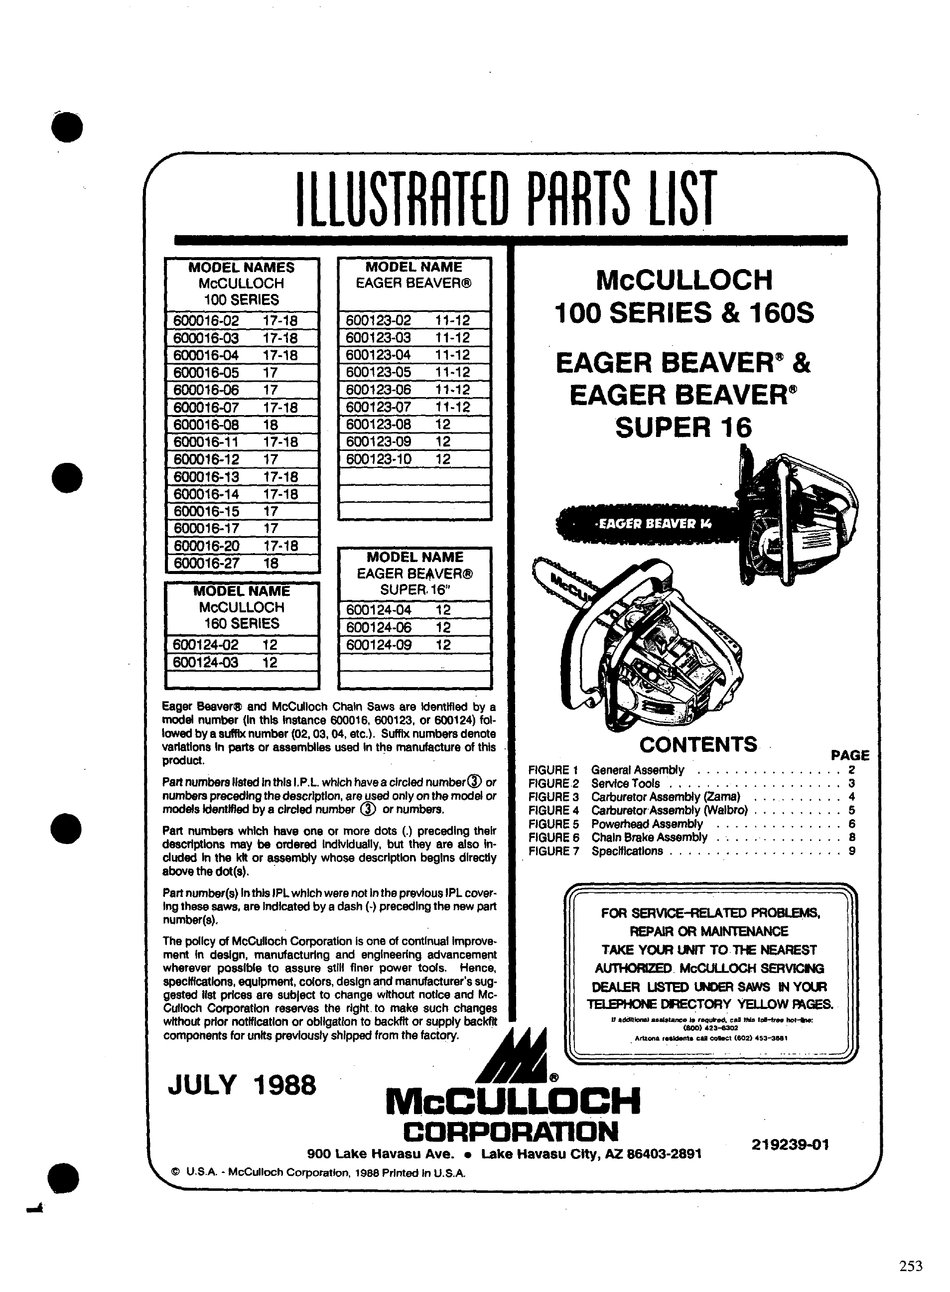 JULY 1976 PRO MAC 55 MODEL CHAIN SAW ILLUSTRATED PARTS LIST MANUAL #92384